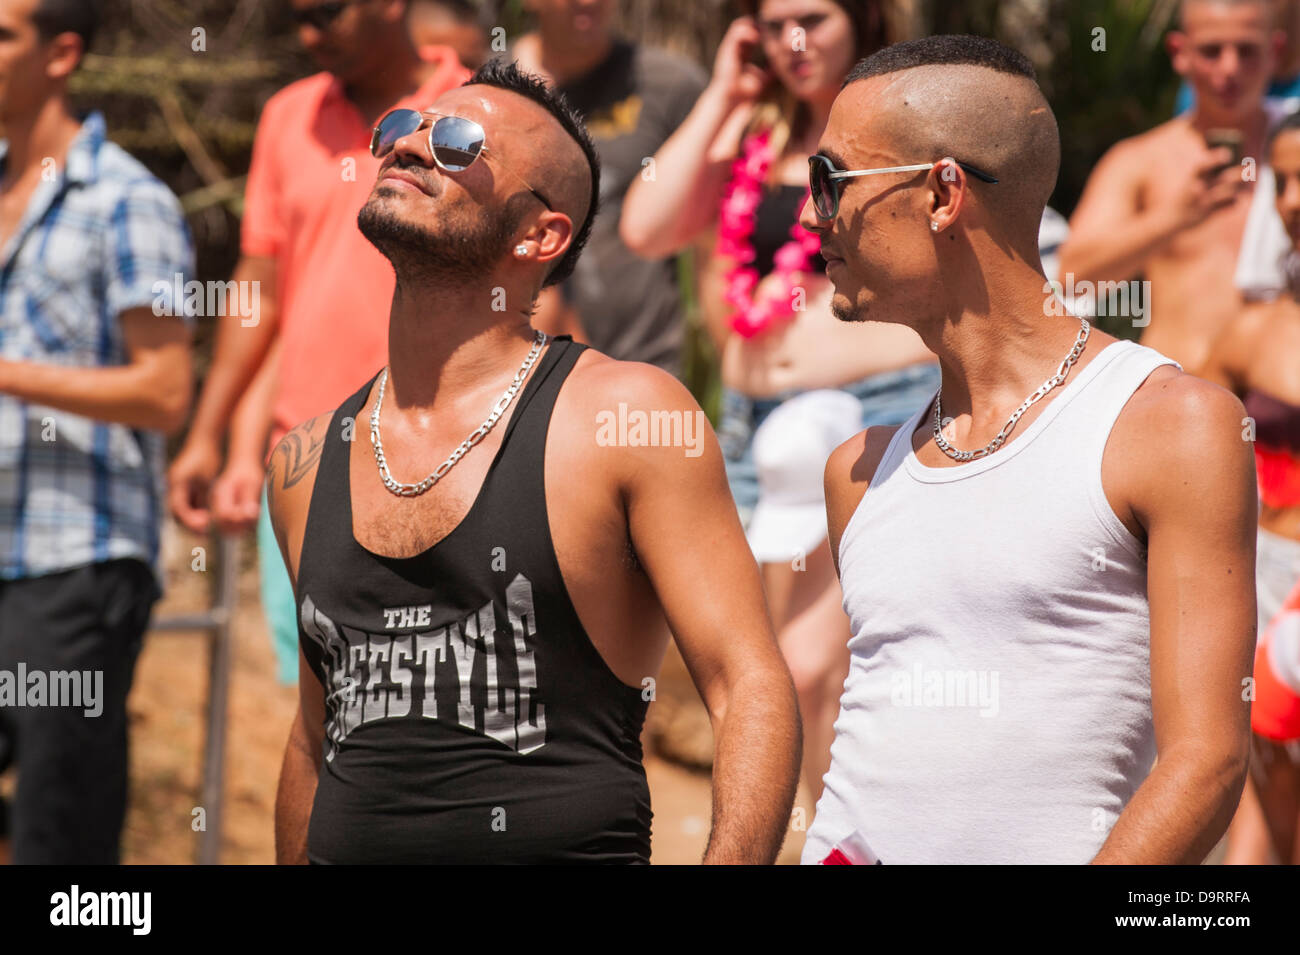 Israel , Tel Aviv , Gay Pride Day parade celebrations 2 two young boys men with shaved heads Mohican hair style & sun glasses Stock Photo